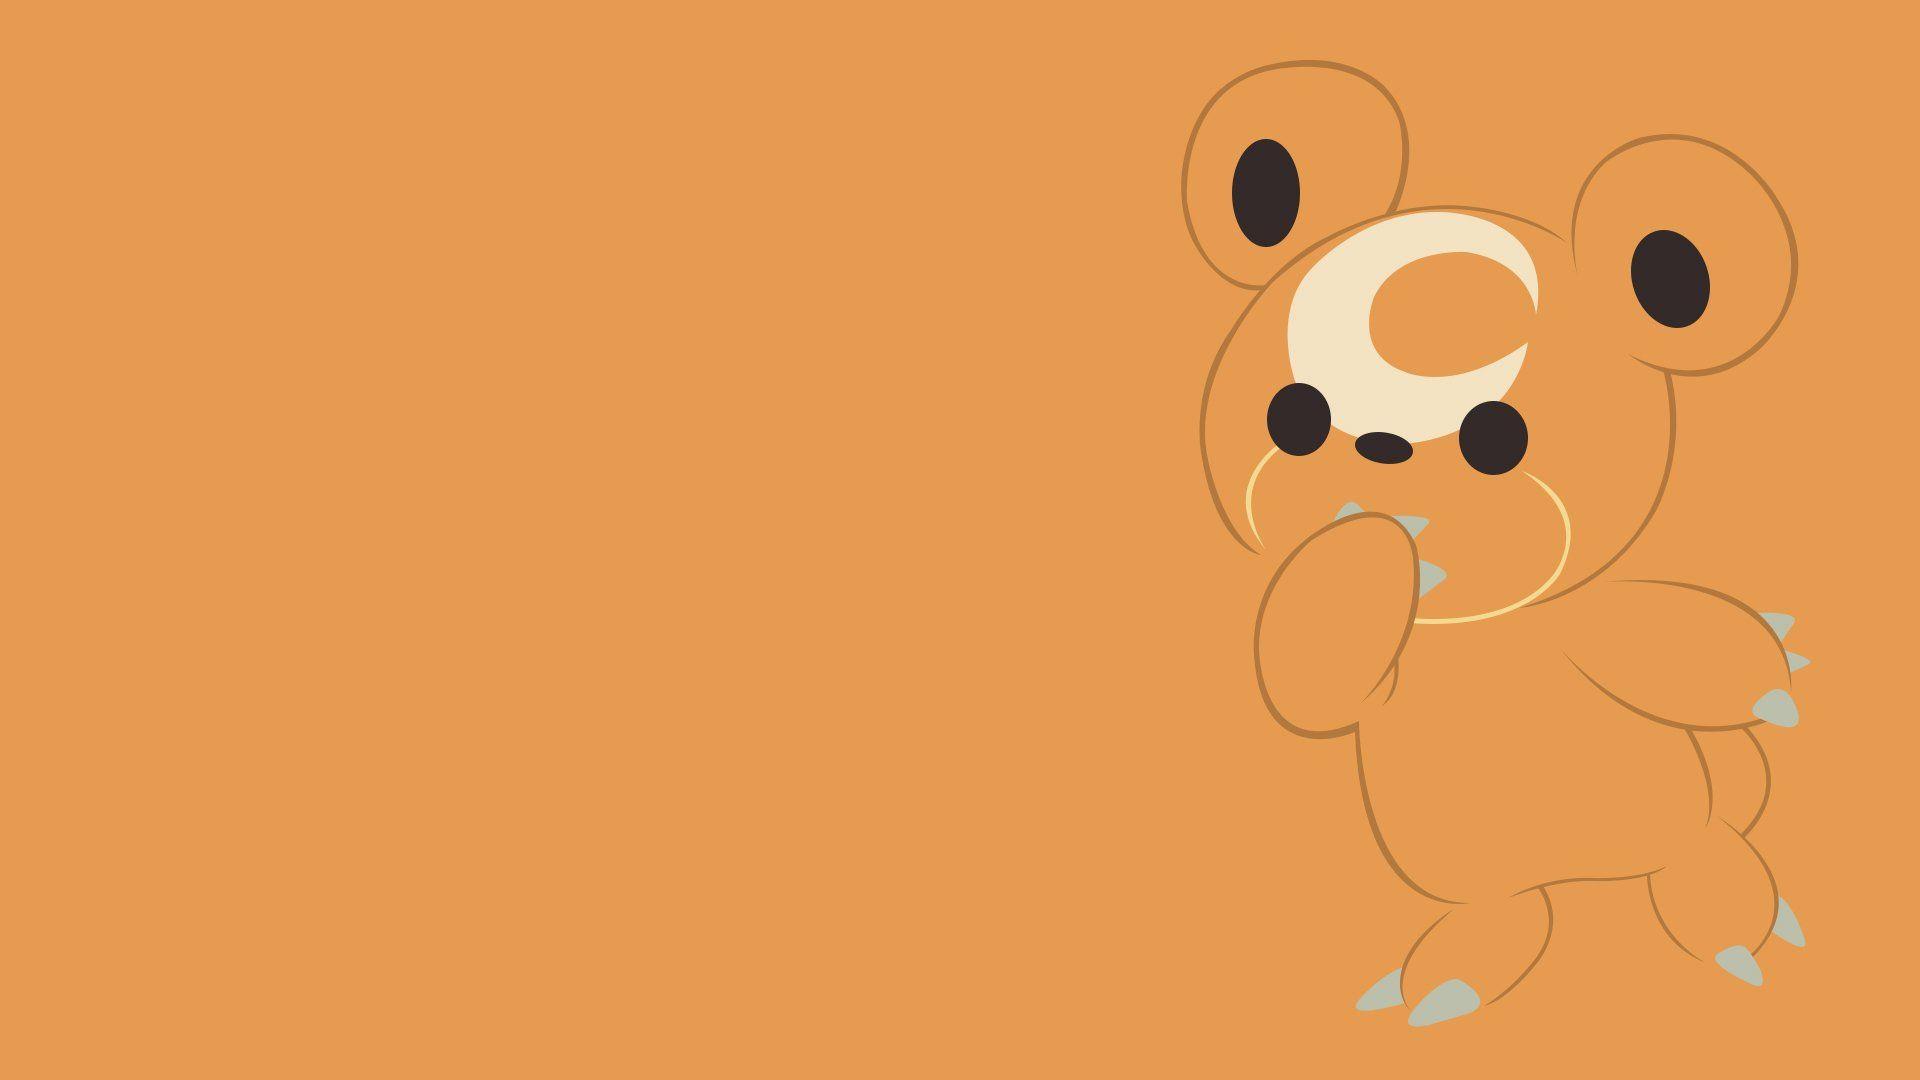 Teddiursa Full HD Wallpapers and Backgrounds Image